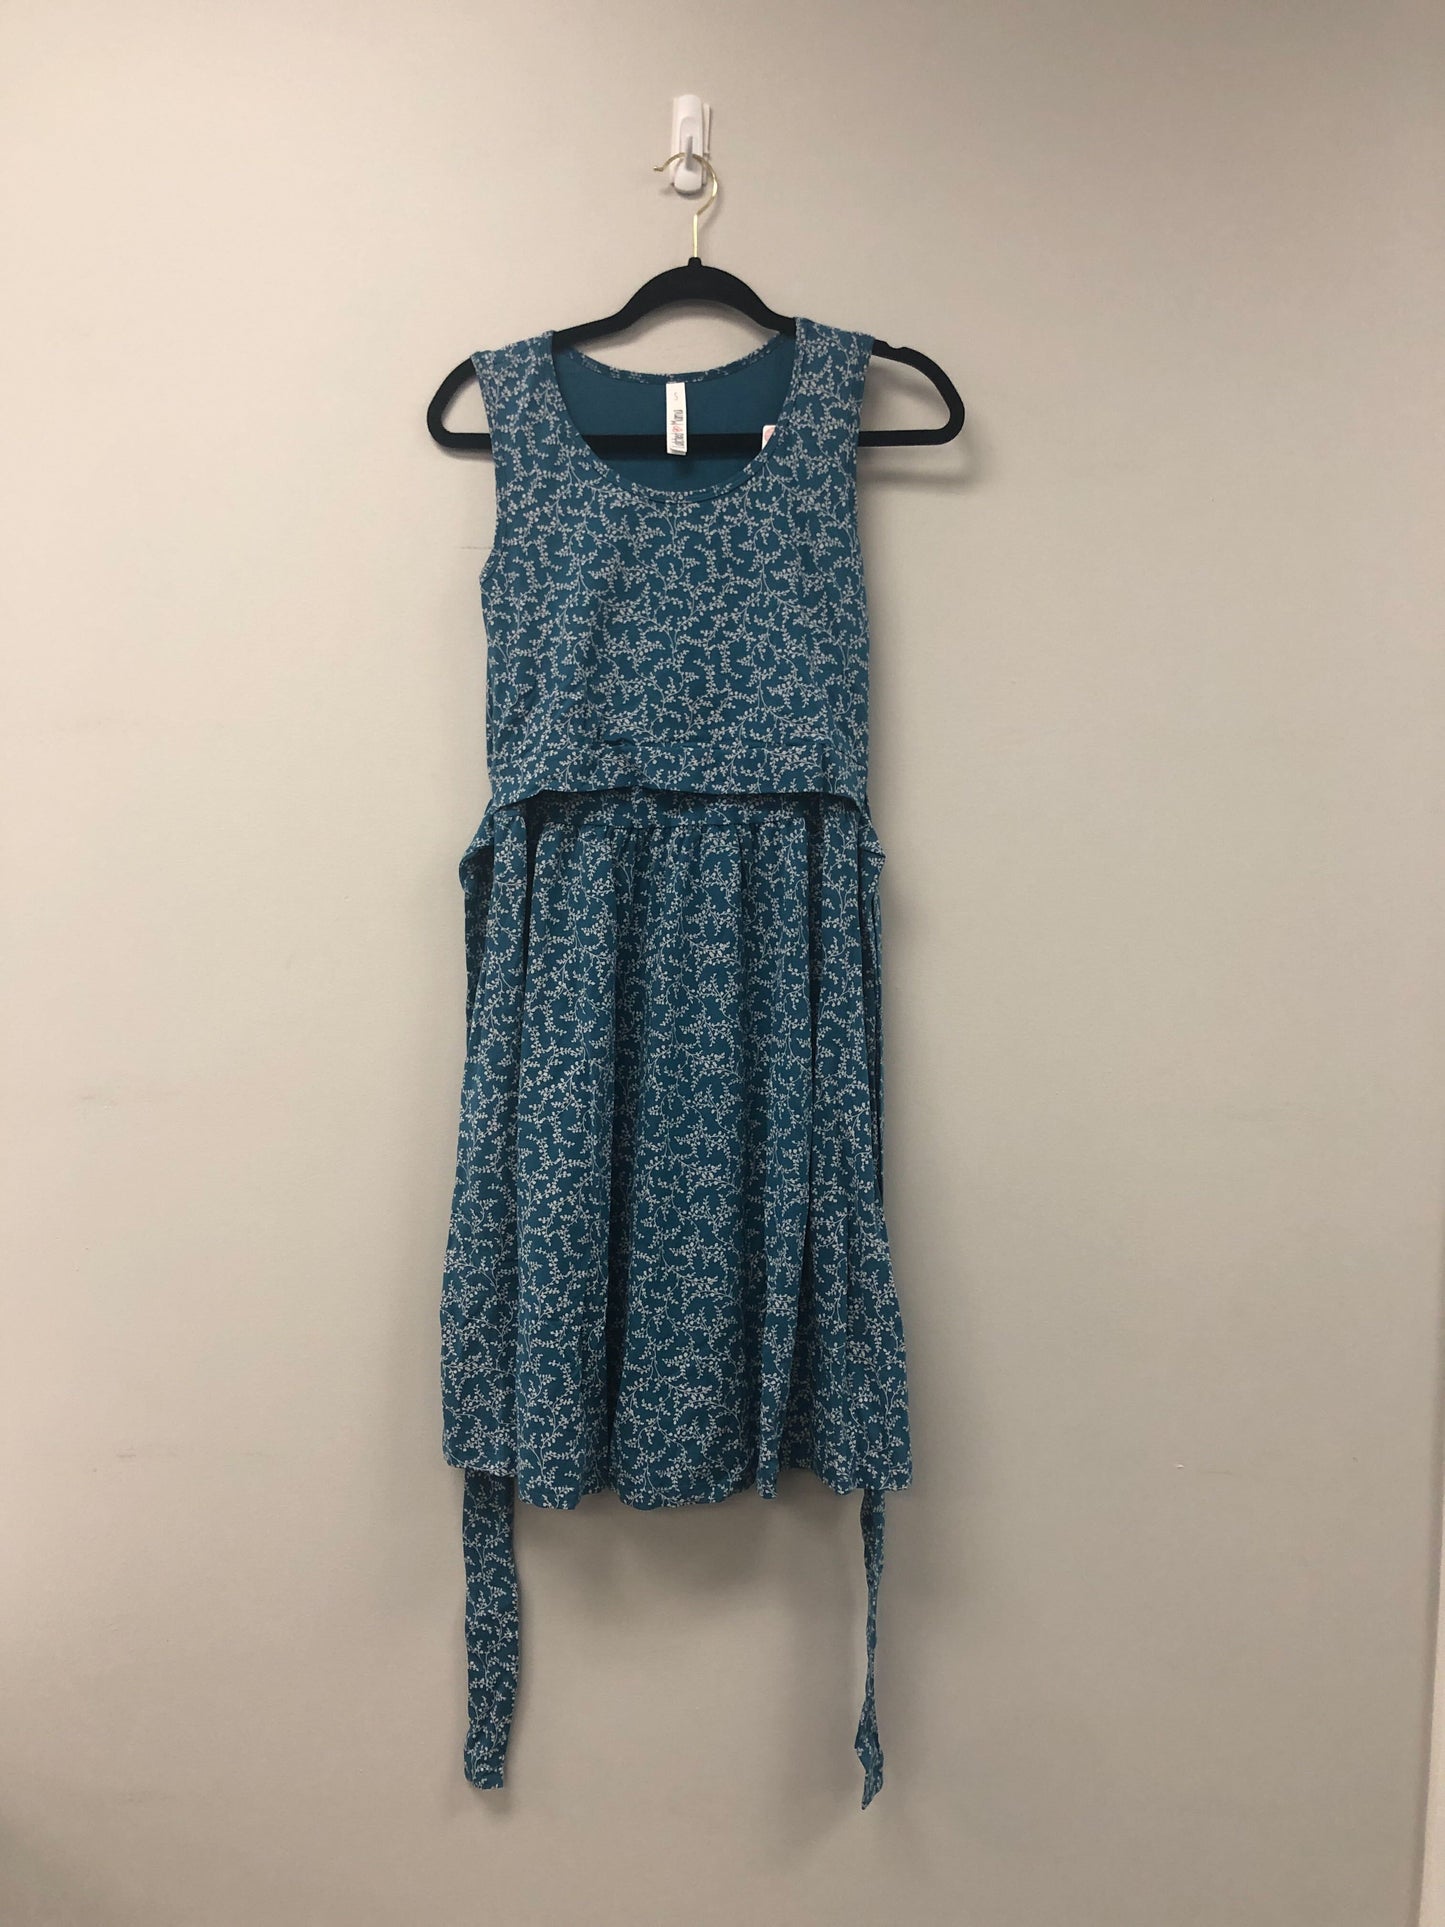 Outlet 5974 - Latched Mama Sunkissed Nursing Sundress - Dainty Teal - Small